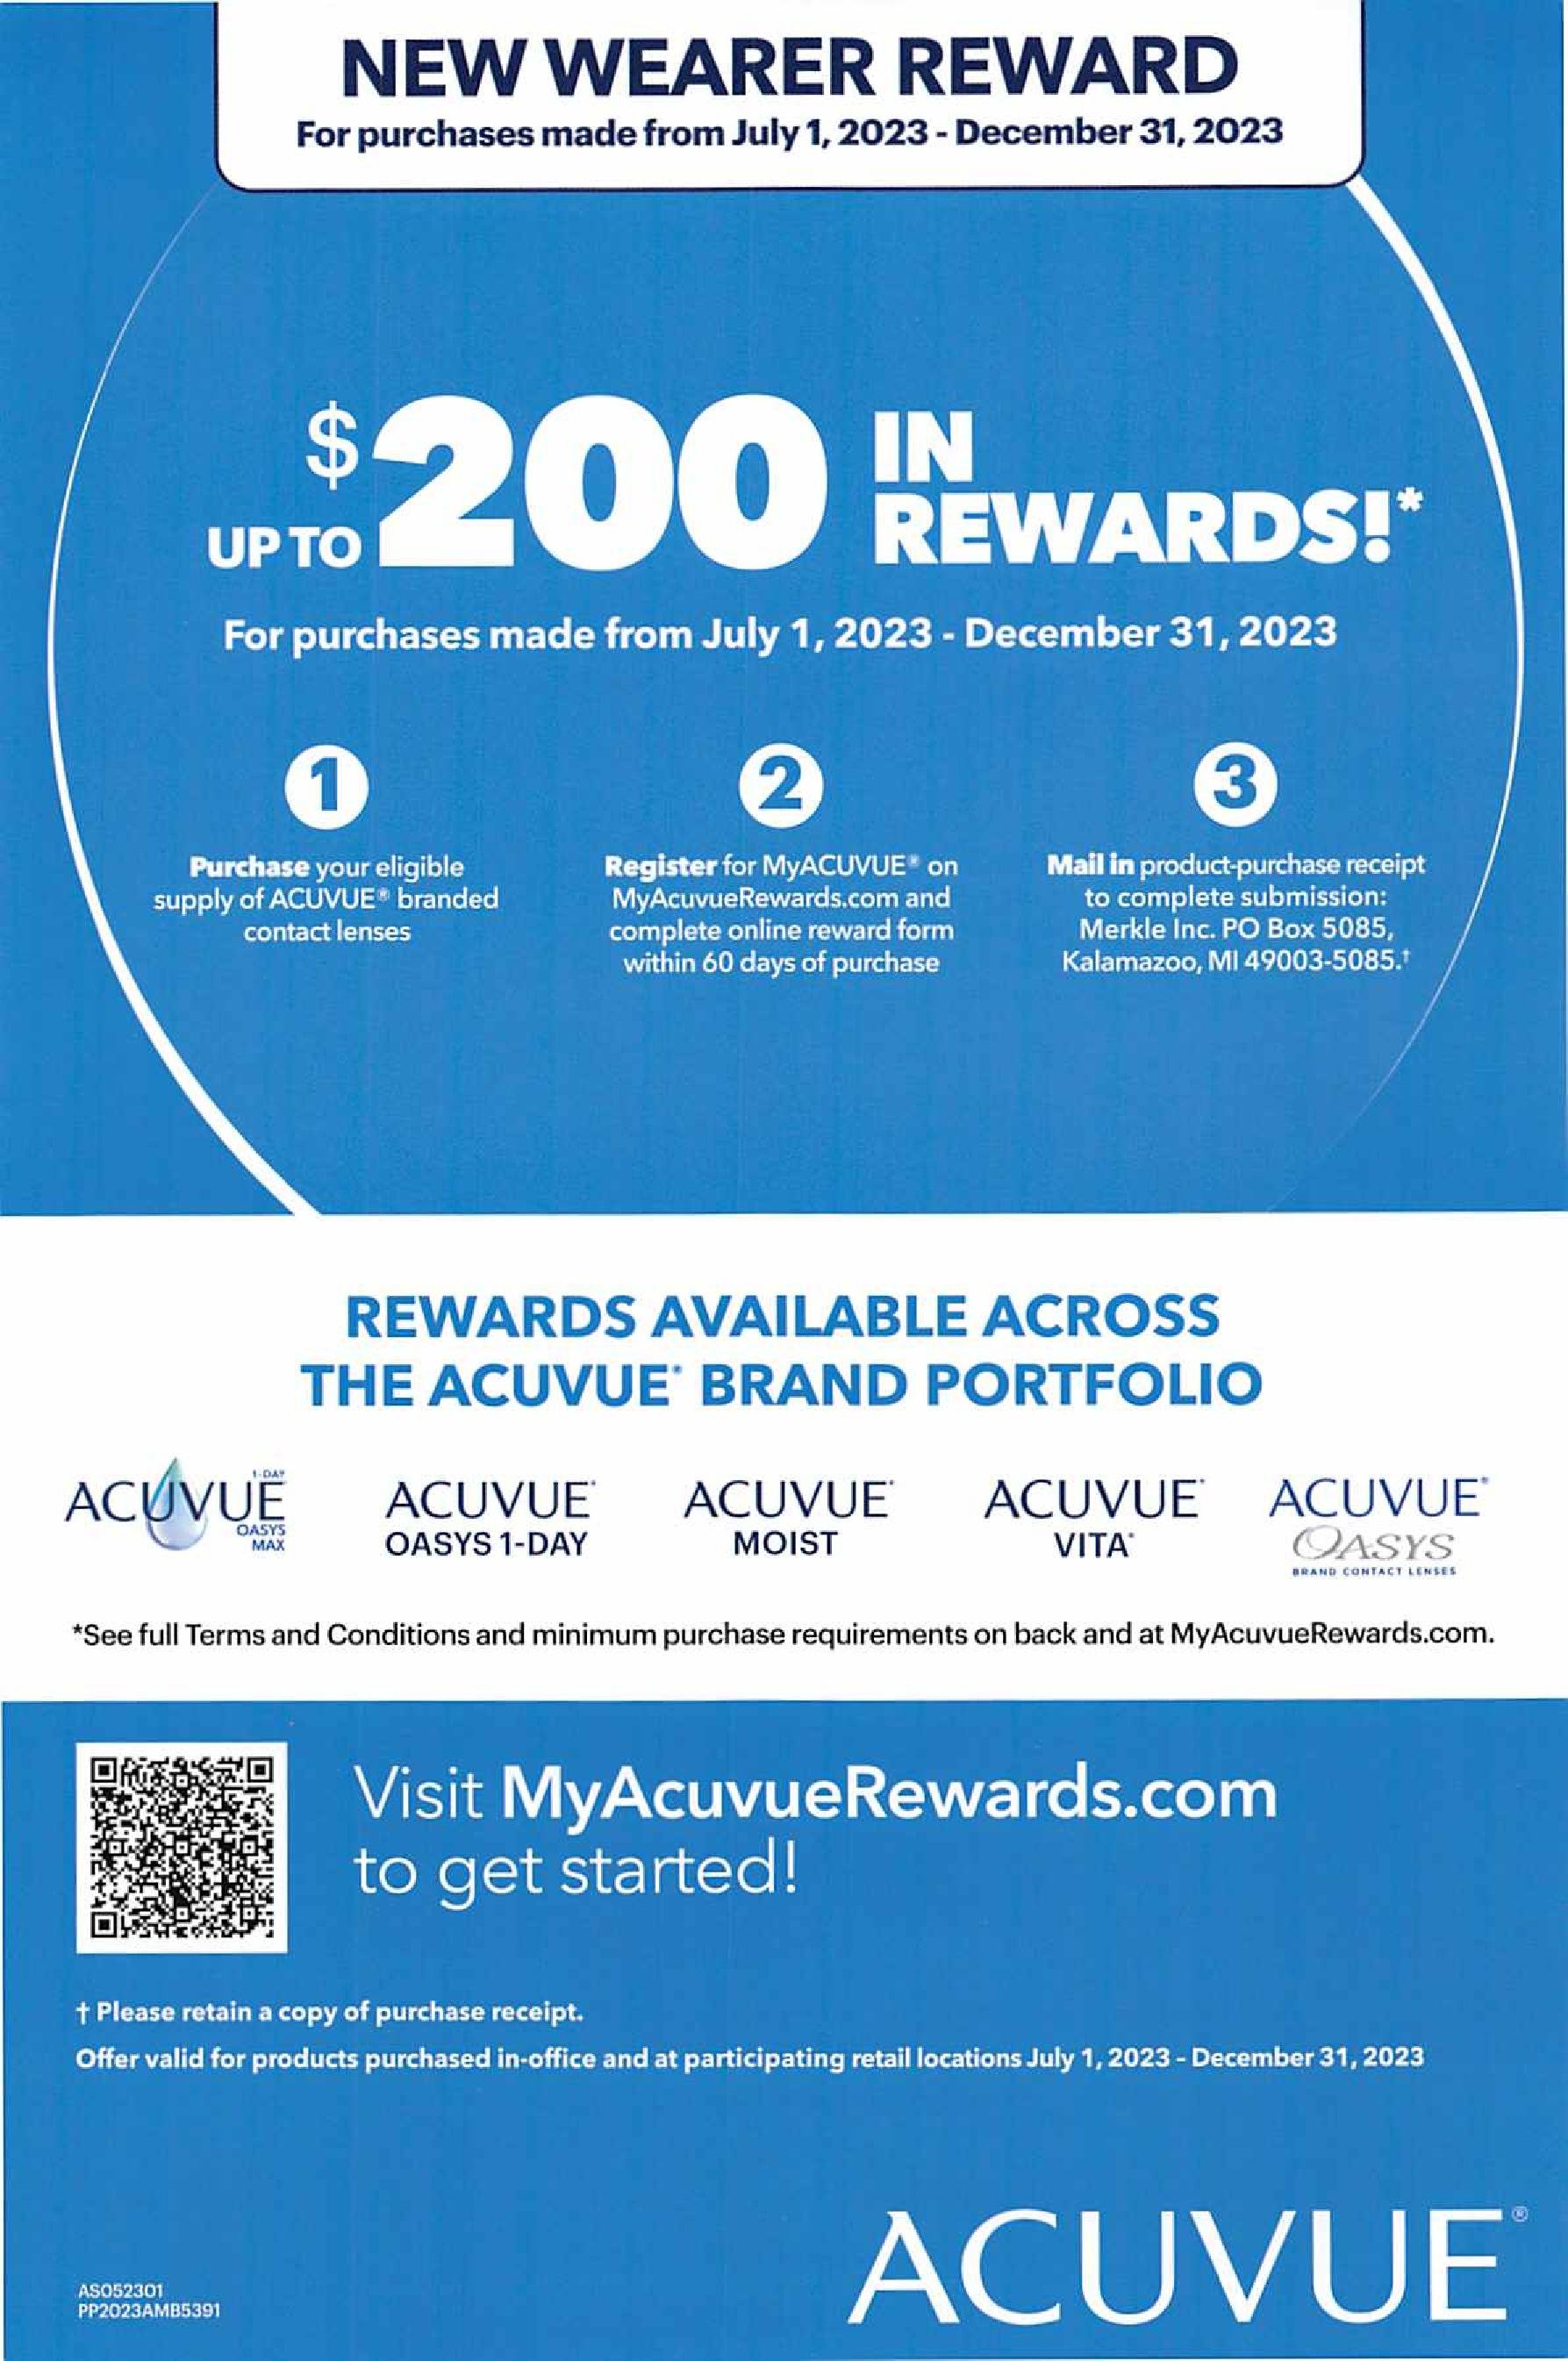 acuvue-contacts-get-rebates-order-online-or-in-local-wi-stores-johnson-johnson-contact